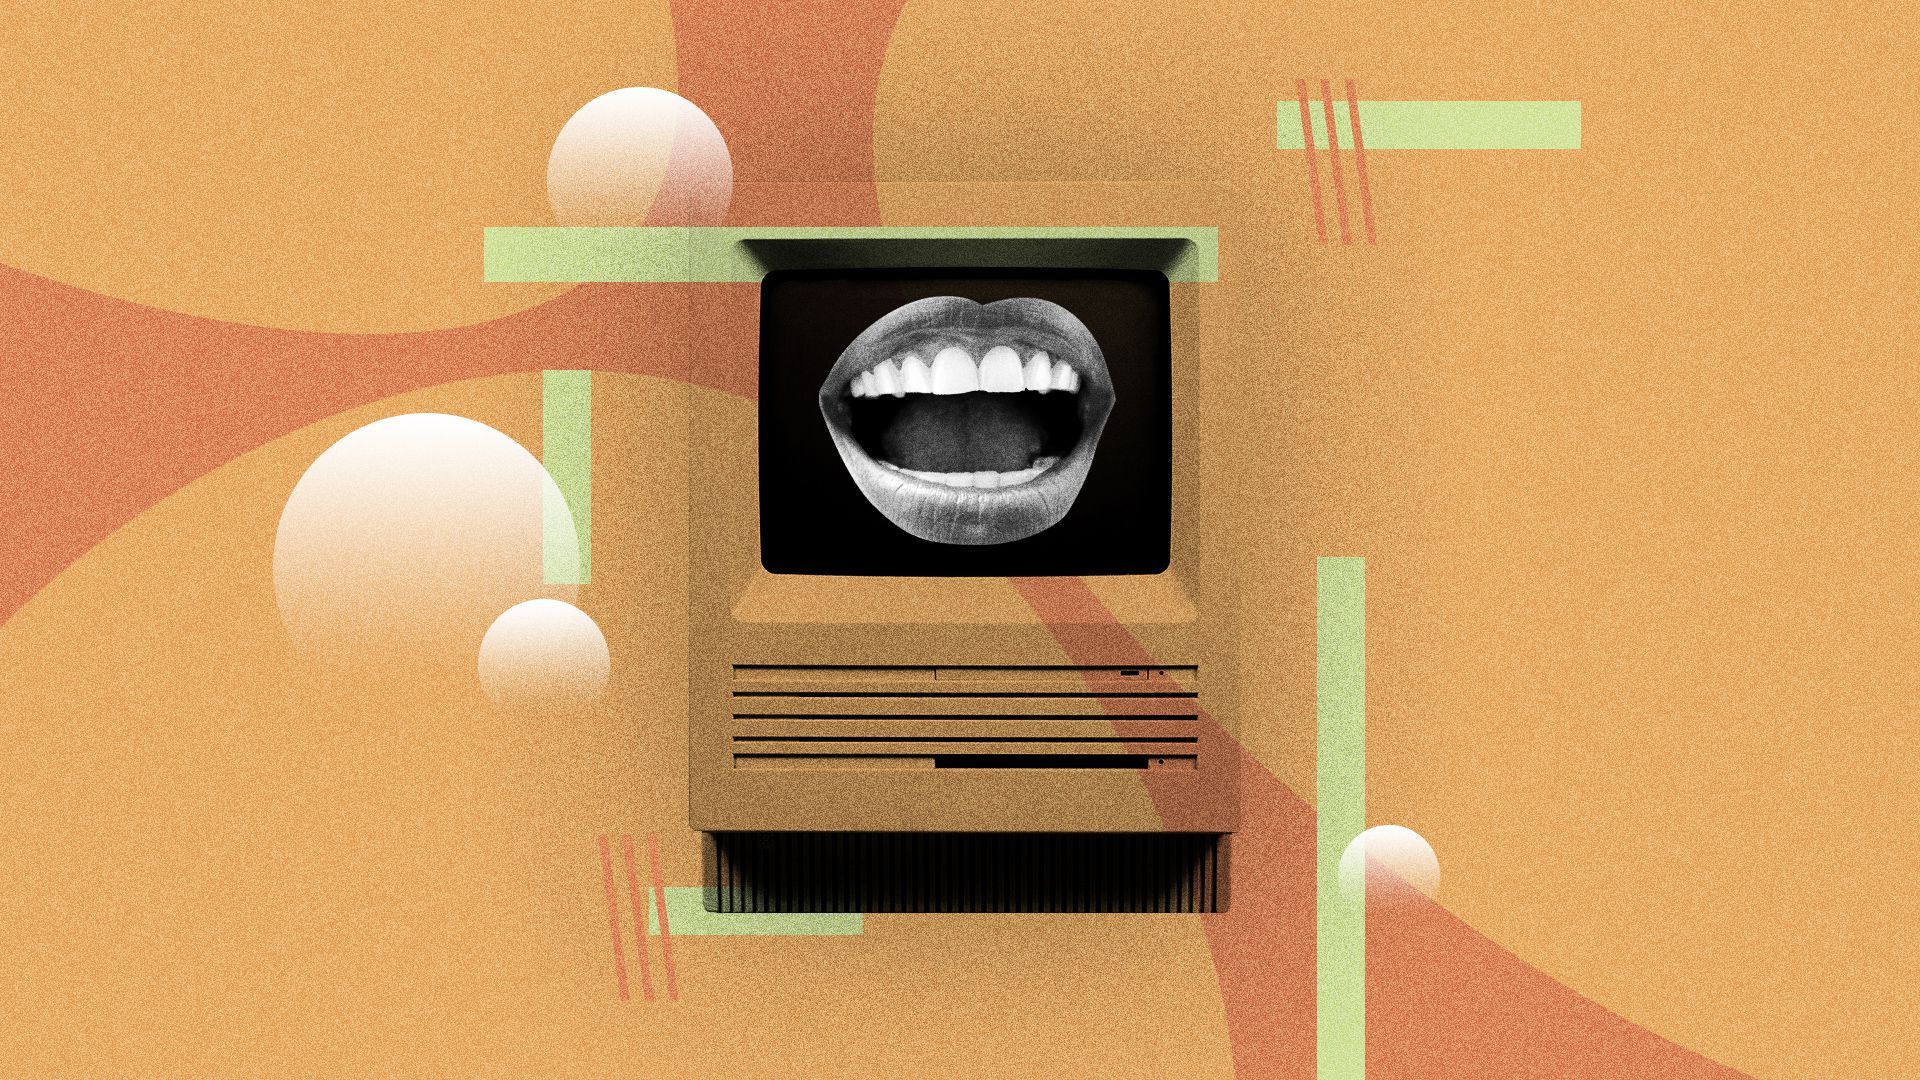 Illustration of an old computer with a mouth on the screen. 